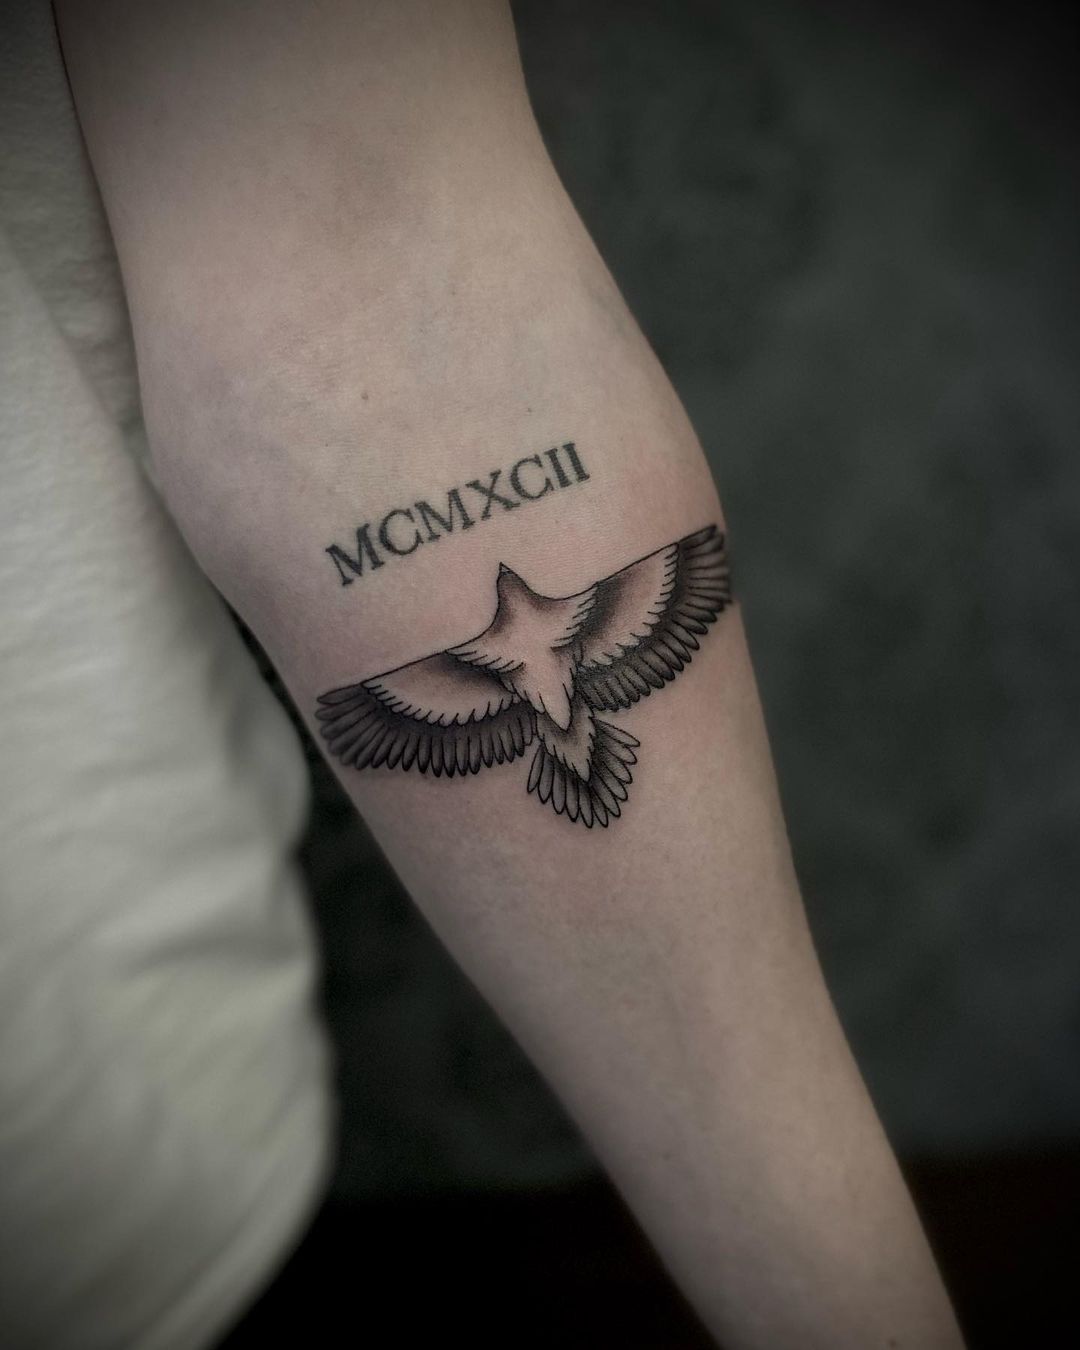 Eagle tattoo on forearm by